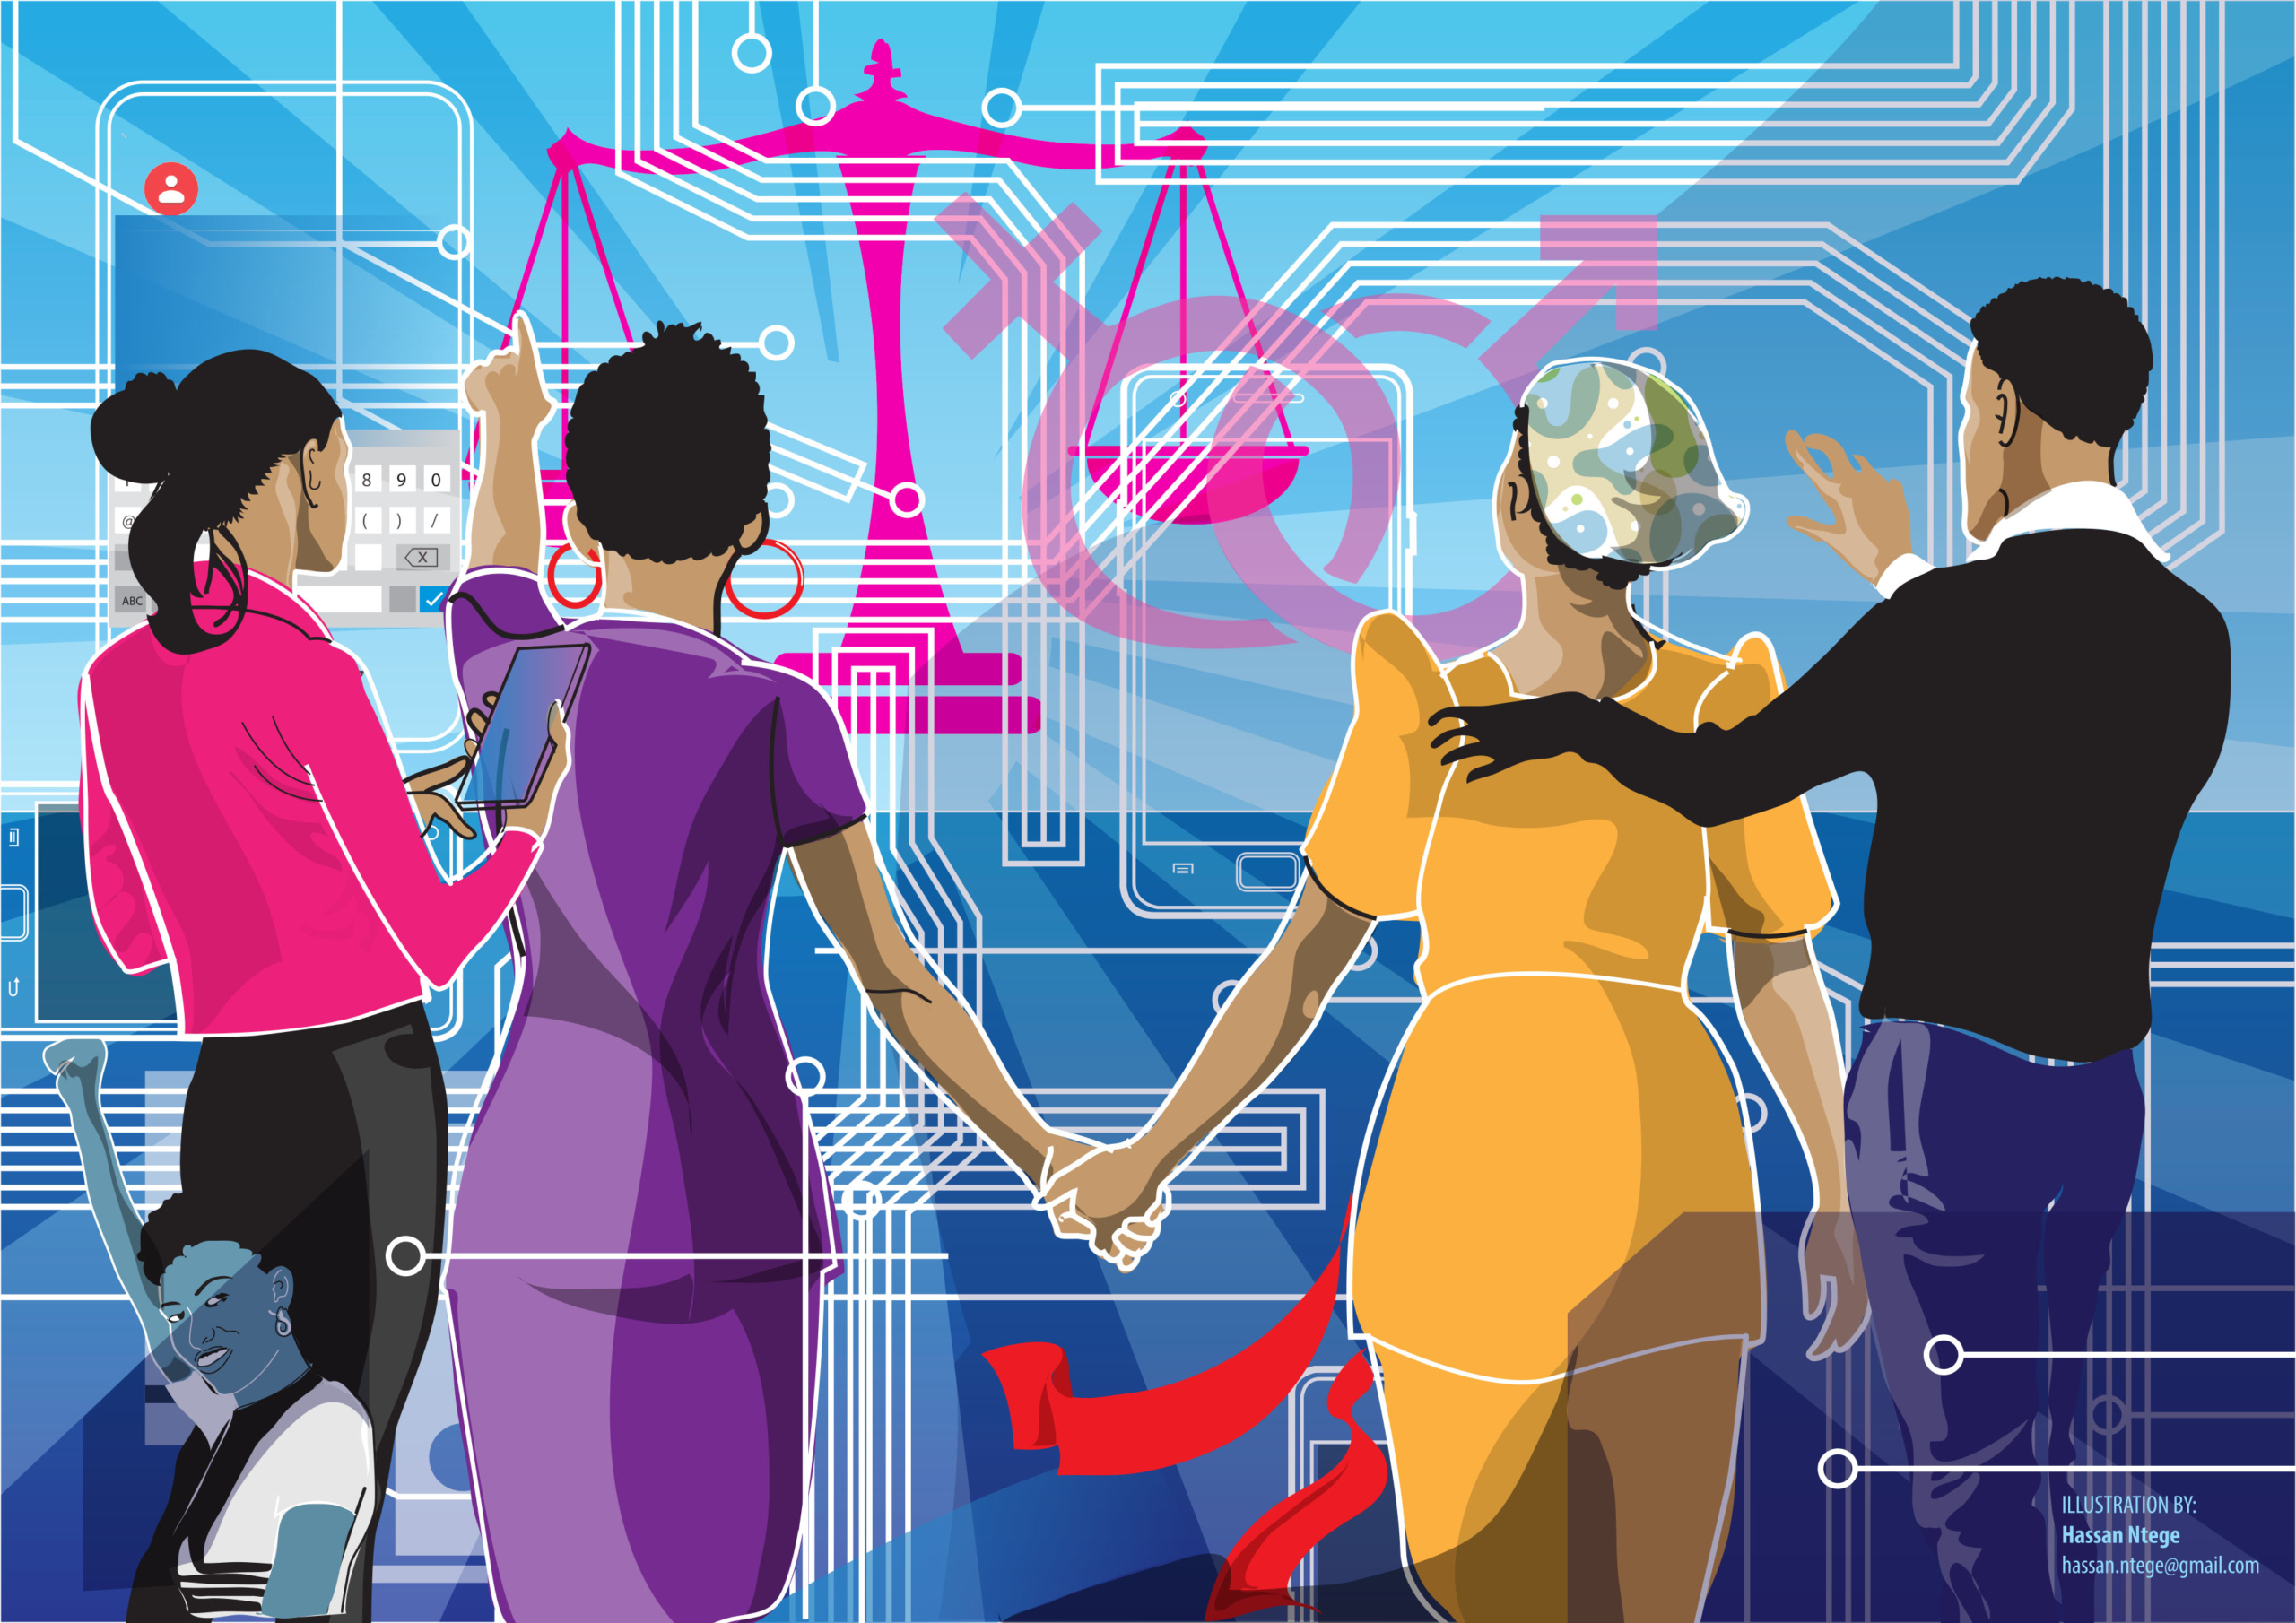 The image shows four people, three women and one man in what seems like a digital/techno space. They are looking at icons or symbols that represent the theme of digital gender quality.